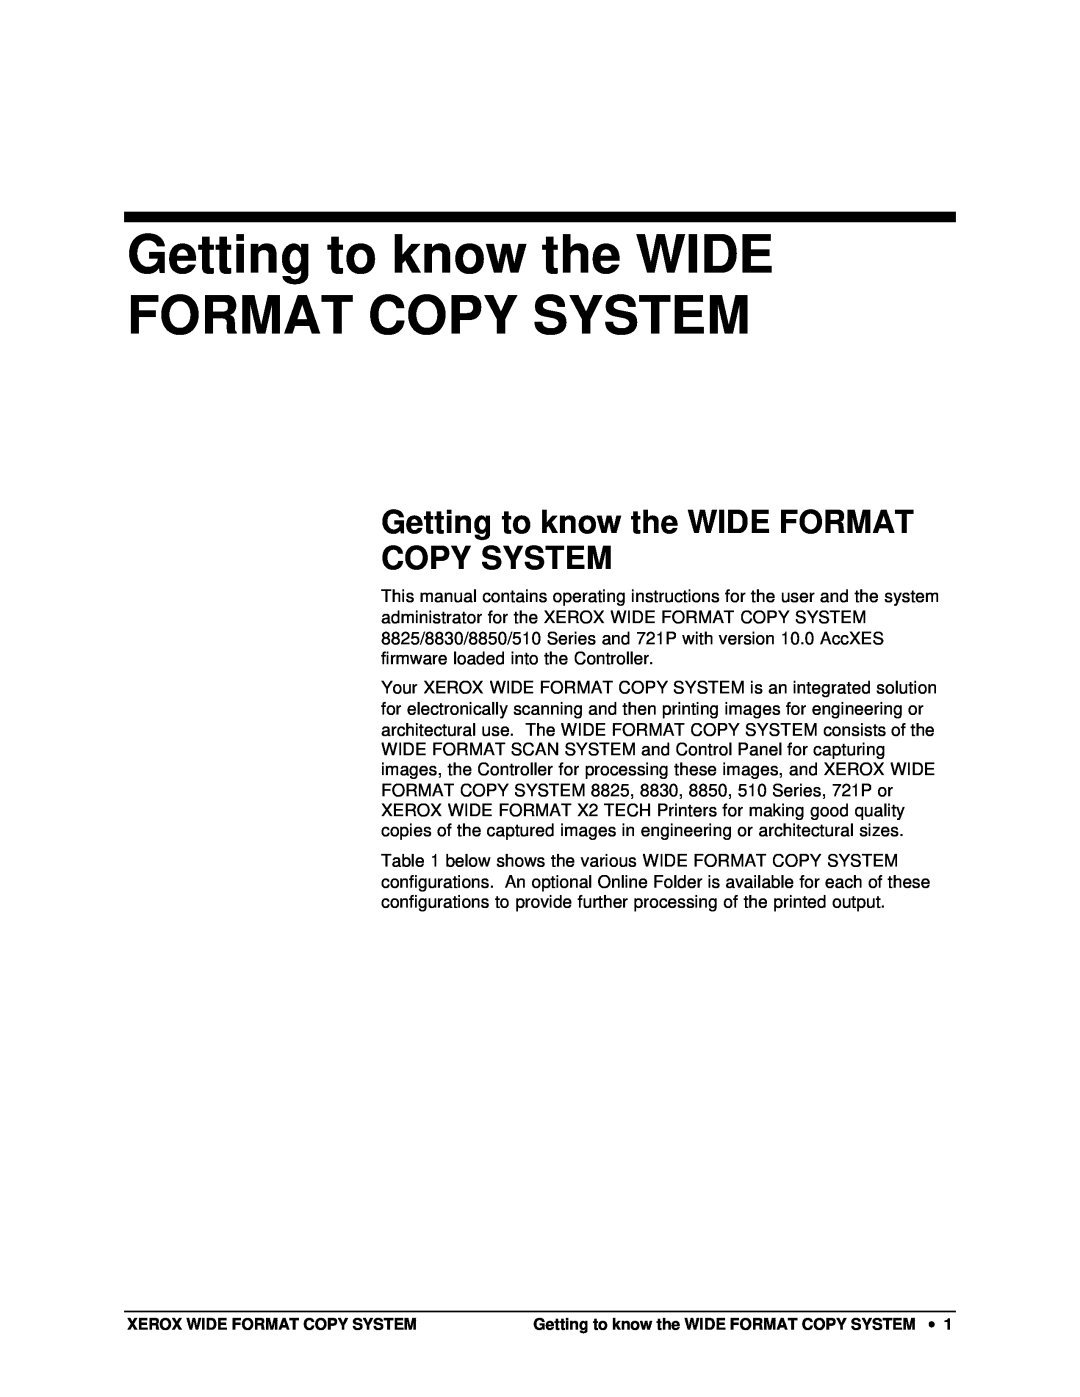 Xerox X2, 8825, 8850, 8830 manual Getting to know the WIDE FORMAT COPY SYSTEM 